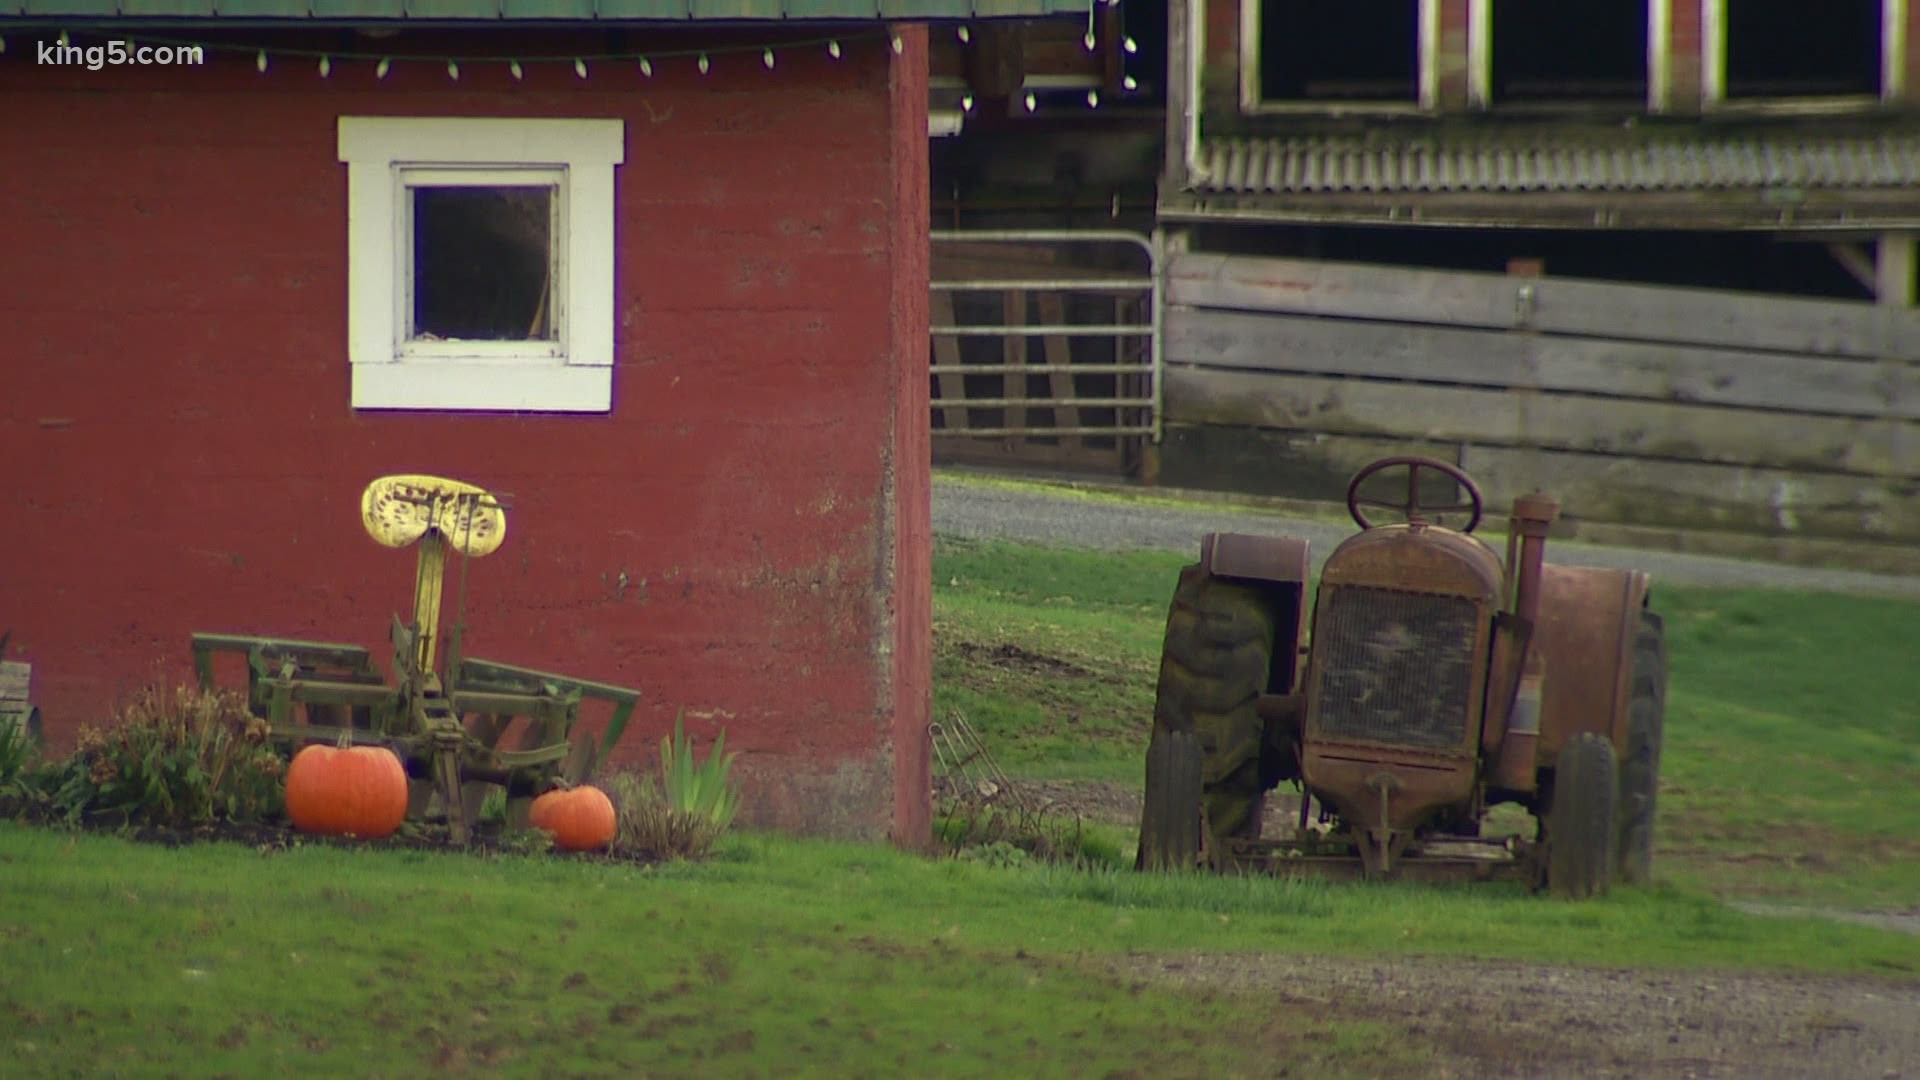 Snohomish County hopes to turn buildings at McCollum Park in Everett into a processing and distribution center for local farmers to use.